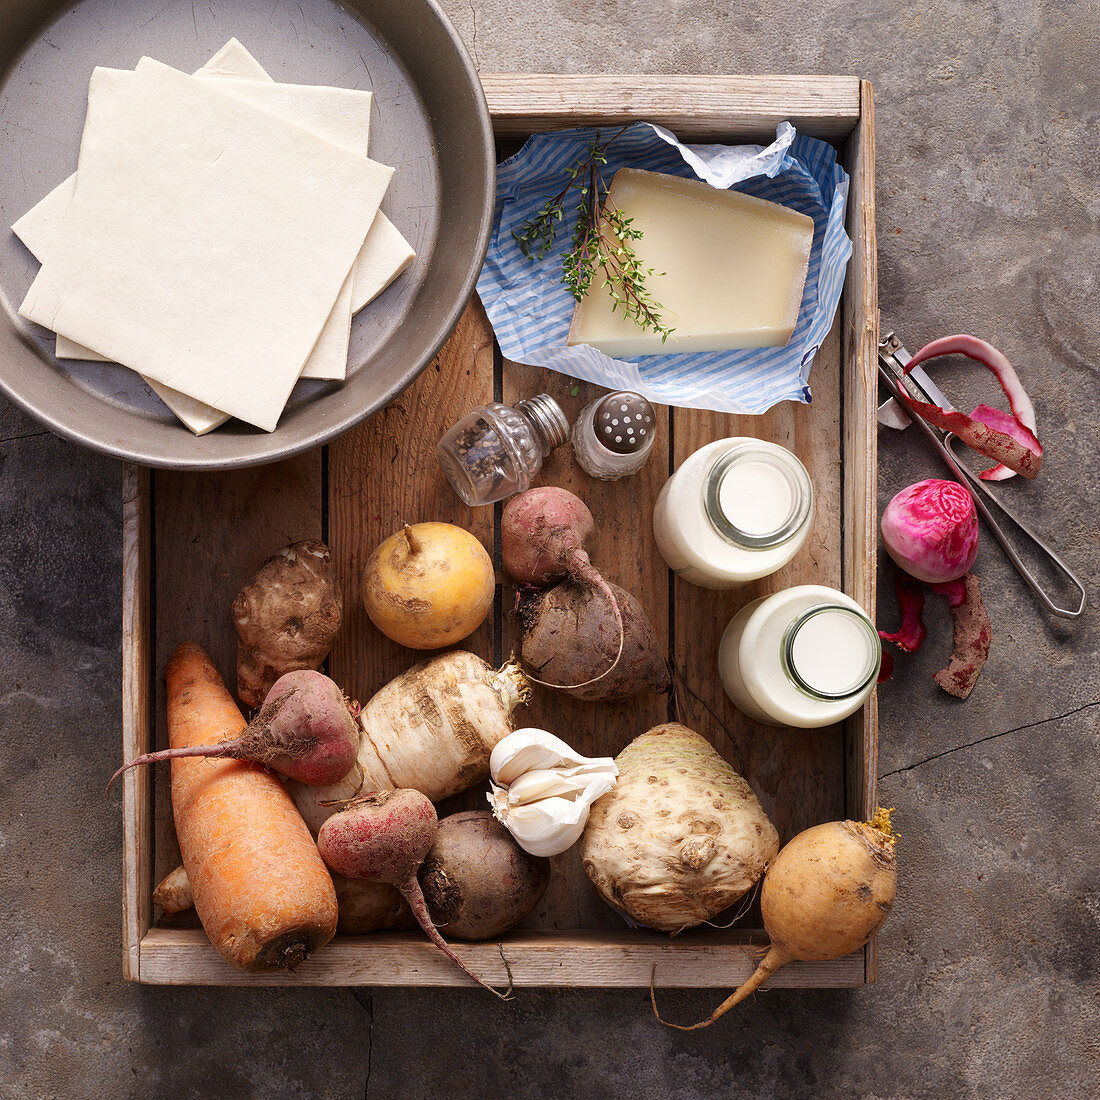 Ingredients for root vegetable tart with cheese